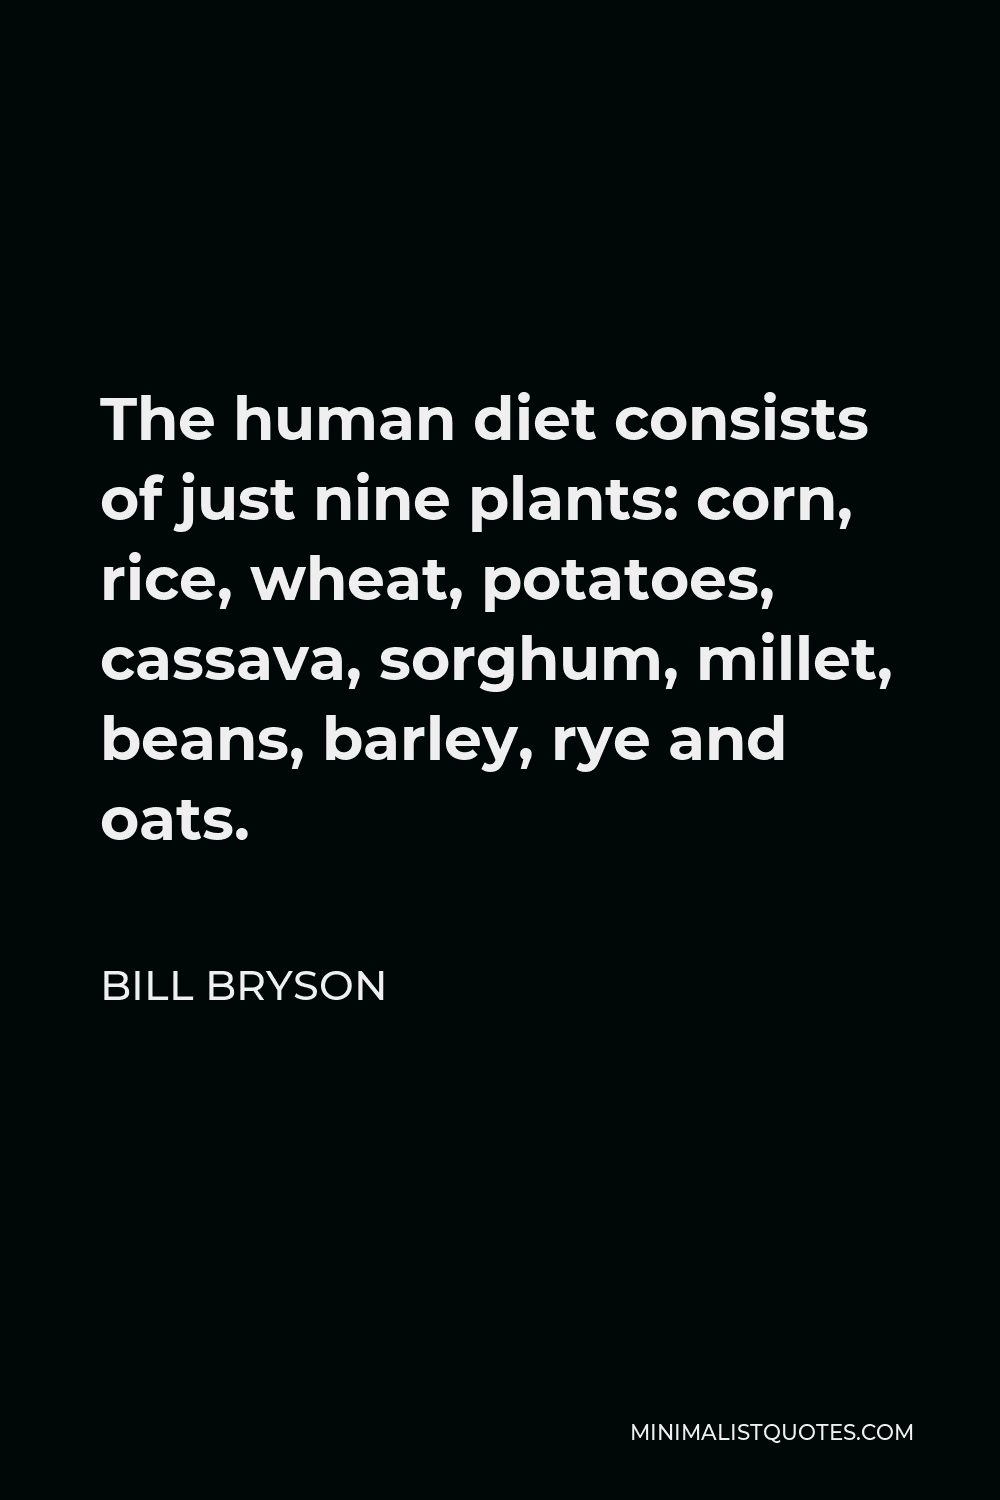 Bill Bryson Quote - The human diet consists of just nine plants: corn, rice, wheat, potatoes, cassava, sorghum, millet, beans, barley, rye and oats.